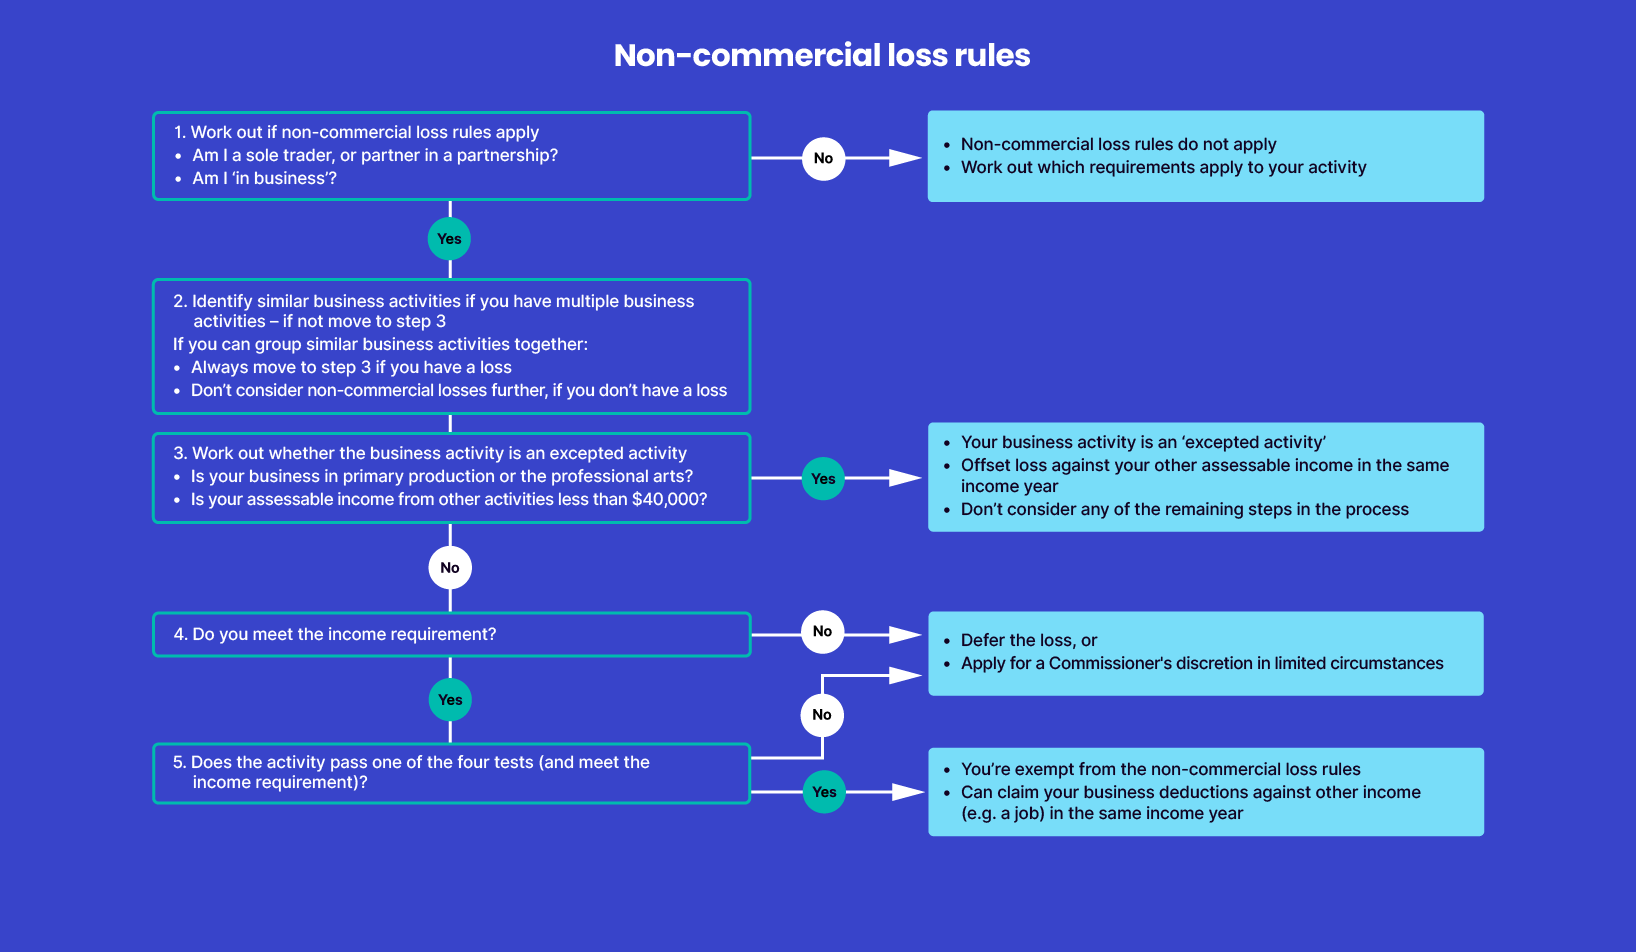 Diagram representing the non-commercial loss rules. In step 4, look at whether your activity passes one of the four tests. If you do not, you must defer your loss, or you may be able to apply for the commissioner's discretion in limited circumstances. If you meet the income requirement, go to step 6.